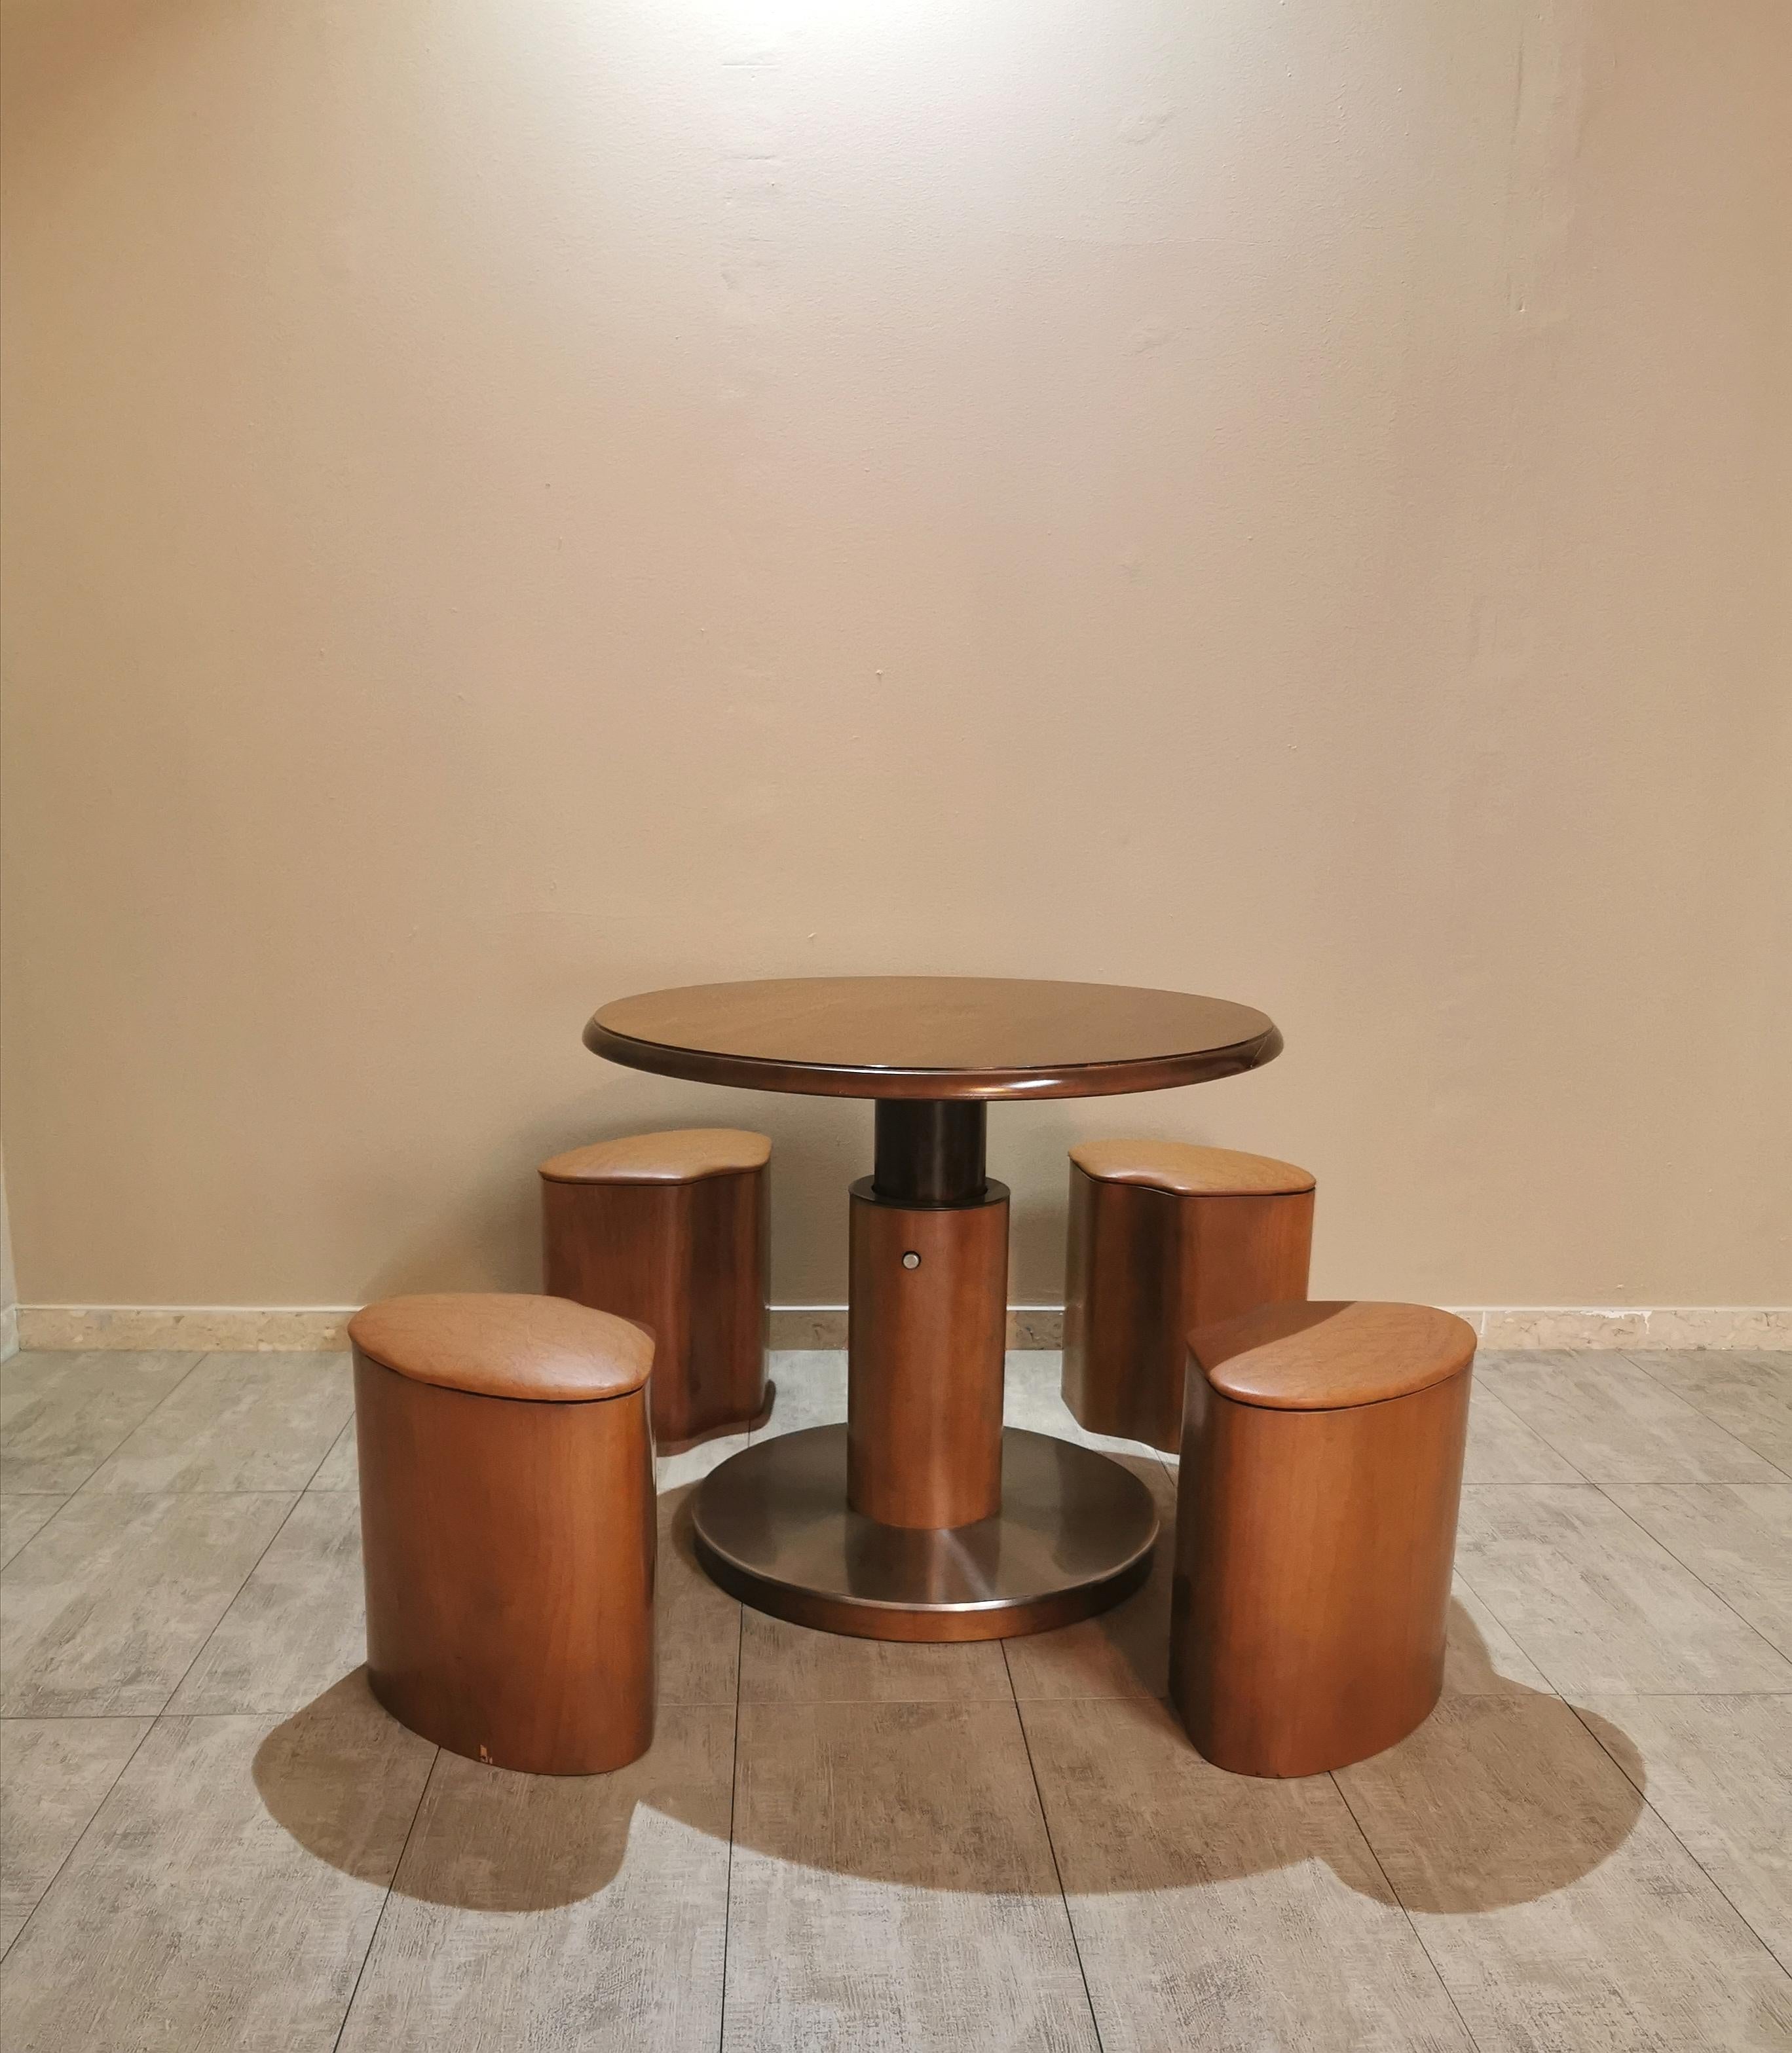 Particular round wooden small game table with aluminum base covering. The peculiarity of this game table consists in the movement in height through a button positioned in the central axis. Includes 4 wooden stools with eco-leather upholstery that